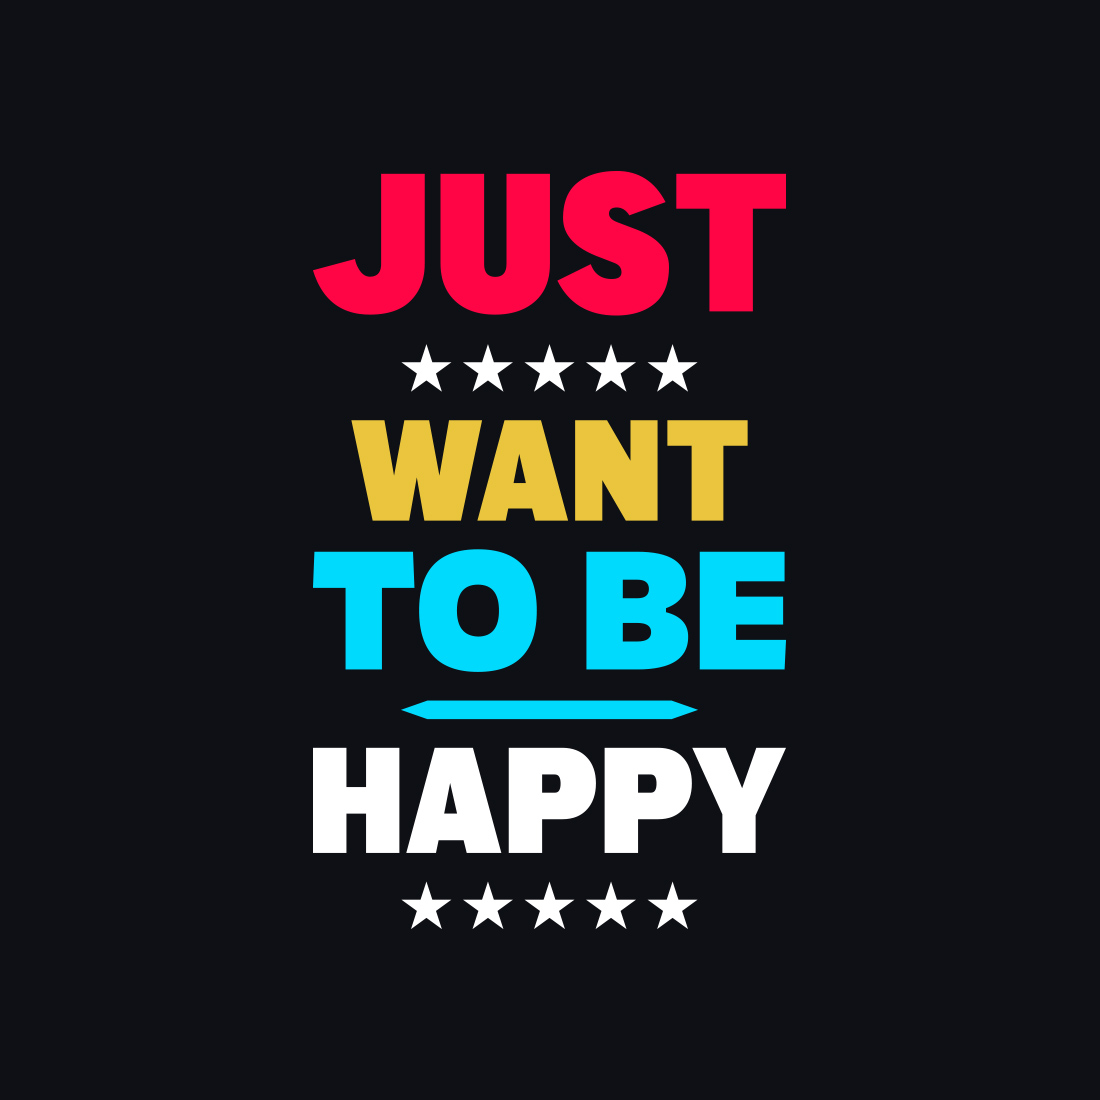 Just Want to Be Happy Typography T-Shirt Design presentation.